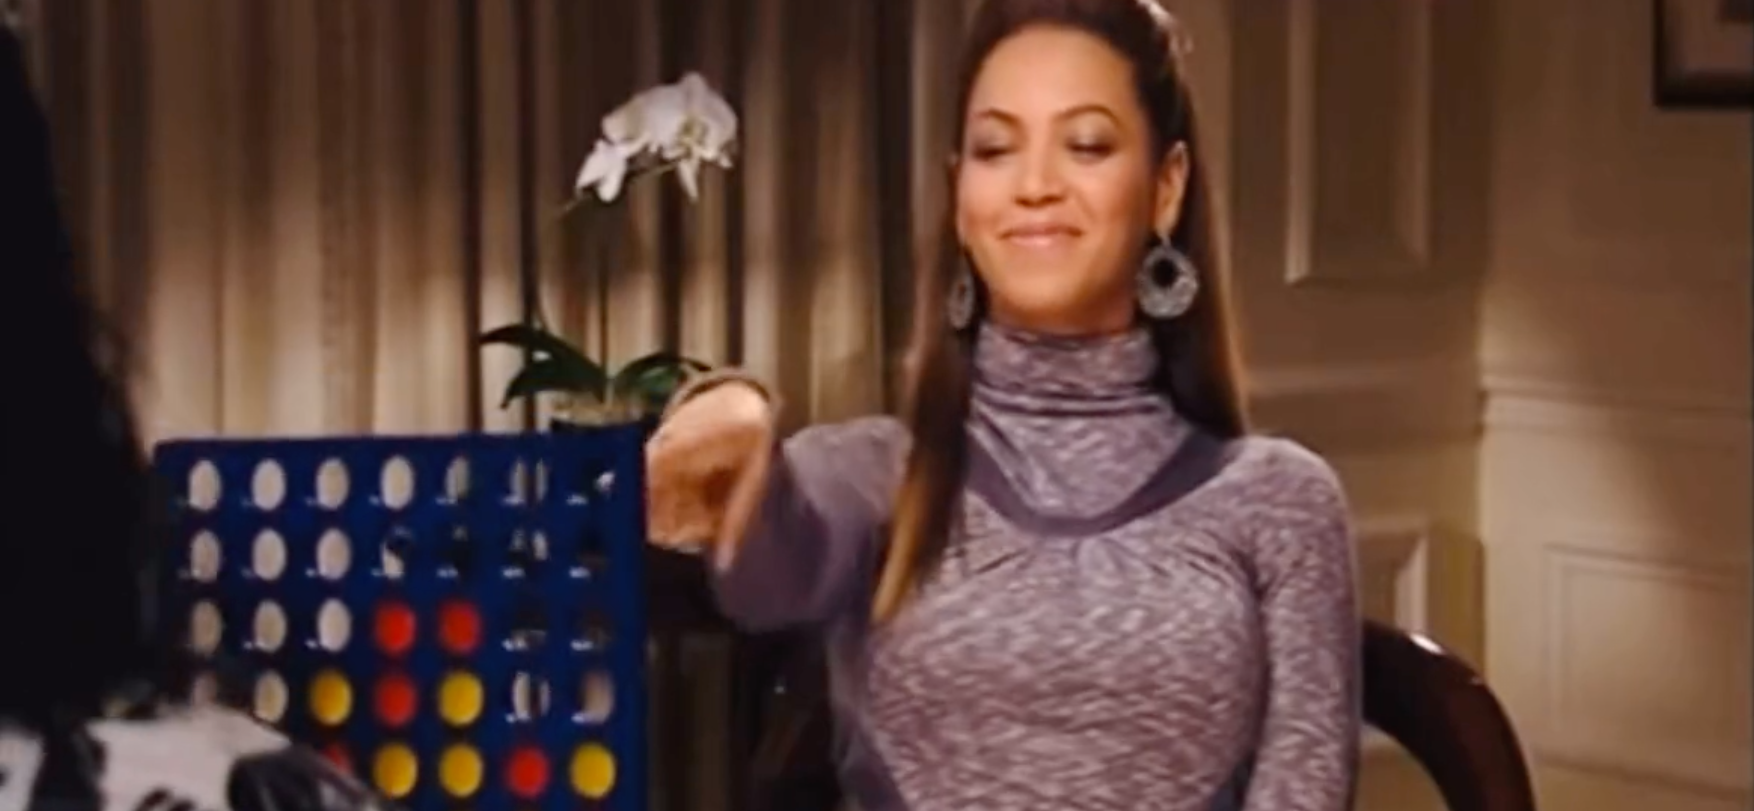 Beyonce plays Connect 4